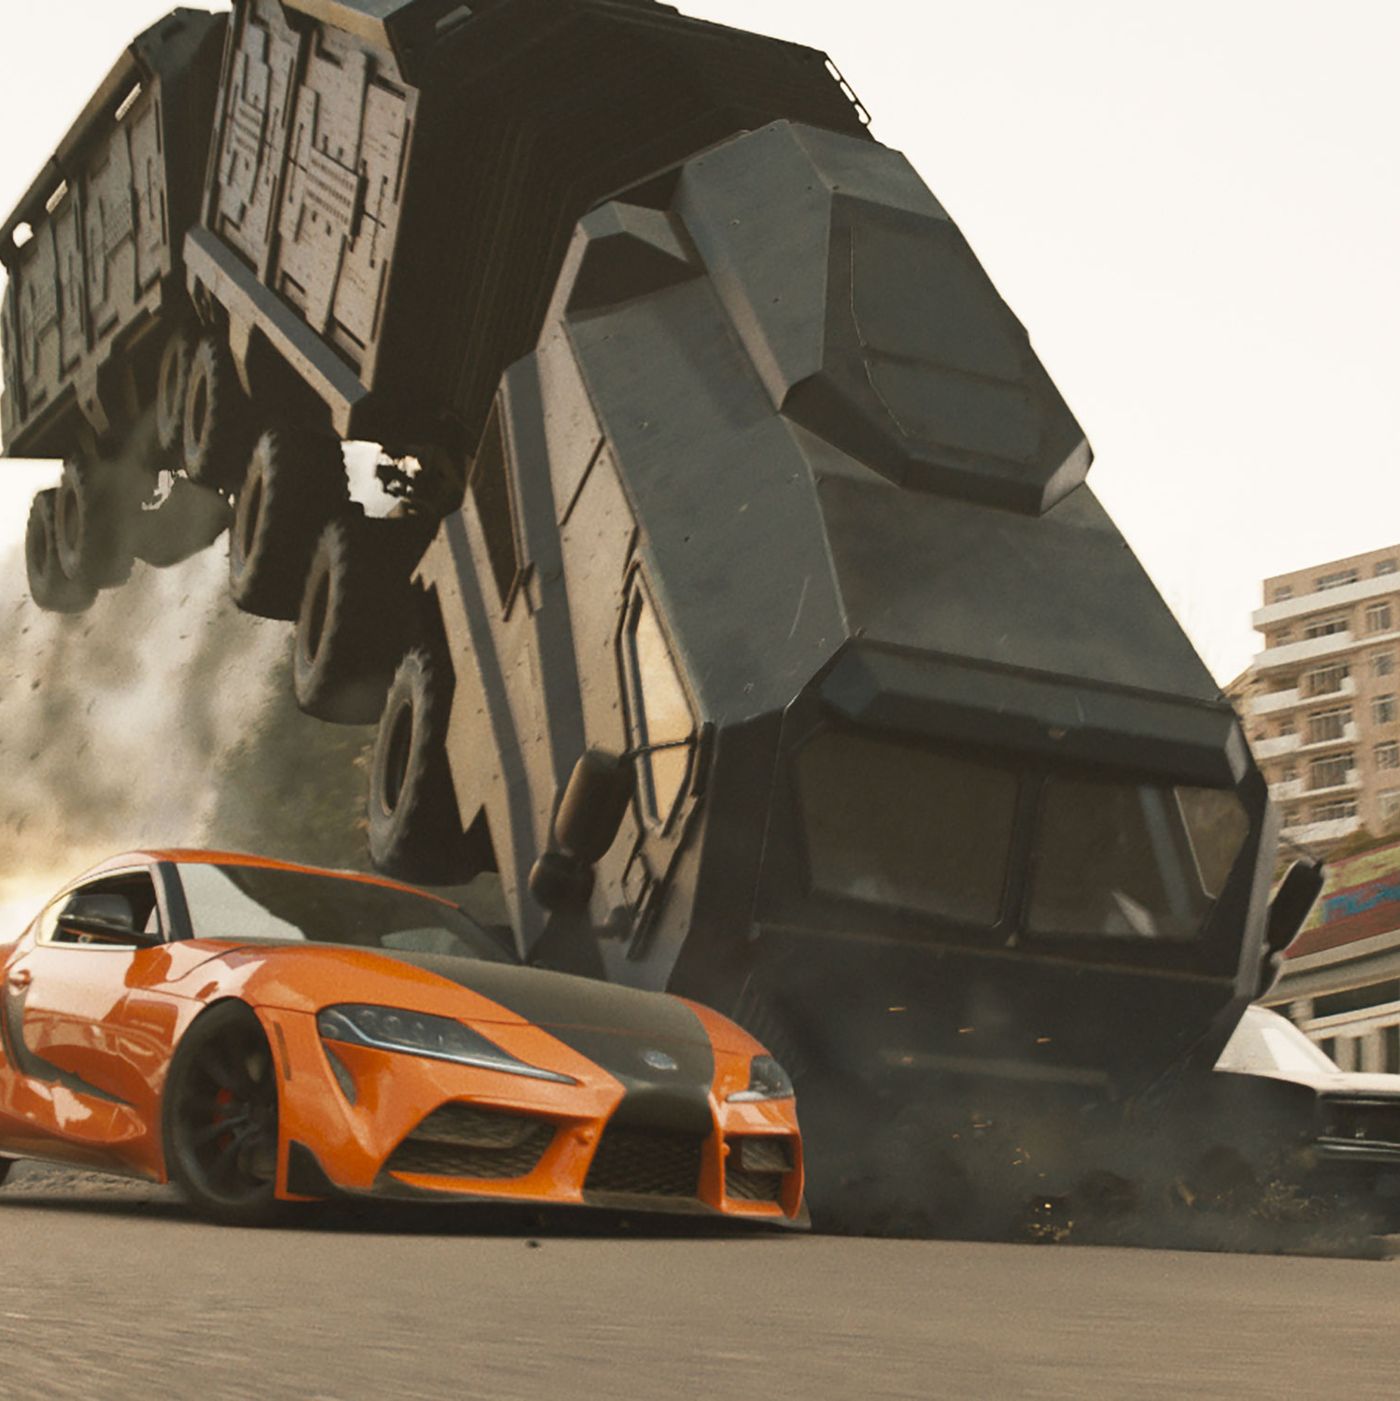 Every Car Chase From the 'Fast & Furious' Franchise, Ranked